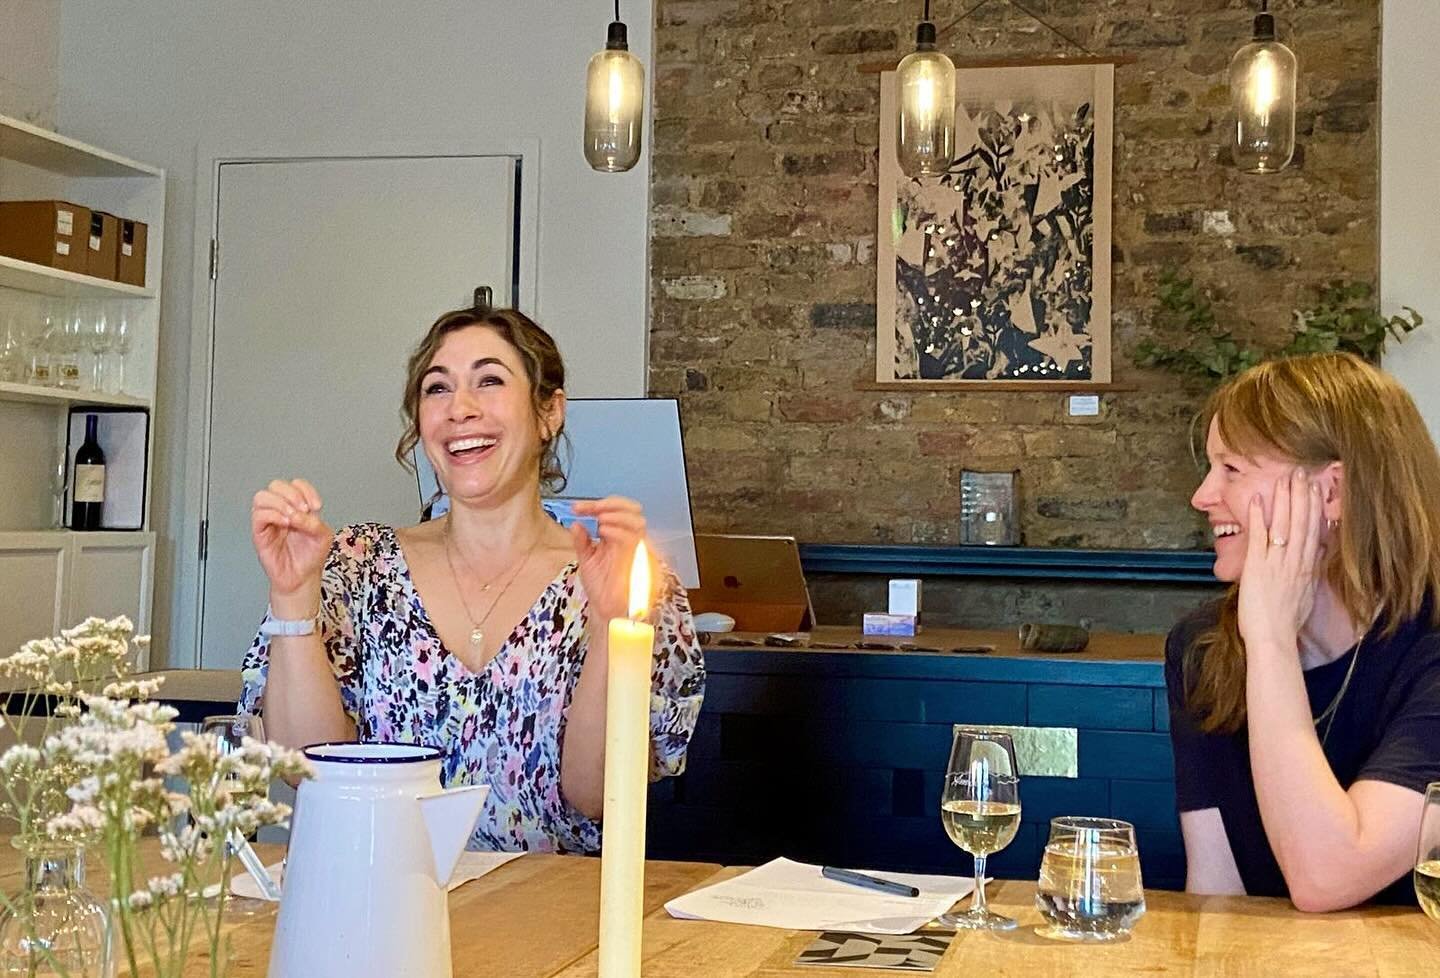 Last night with @yardarm_leyton at our event Practical Nutrition.

I have no idea what I was saying here, but it was such a special evening talking about how to find pleasure in everyday routines while supporting our wellbeing. 

Eliza took us throug